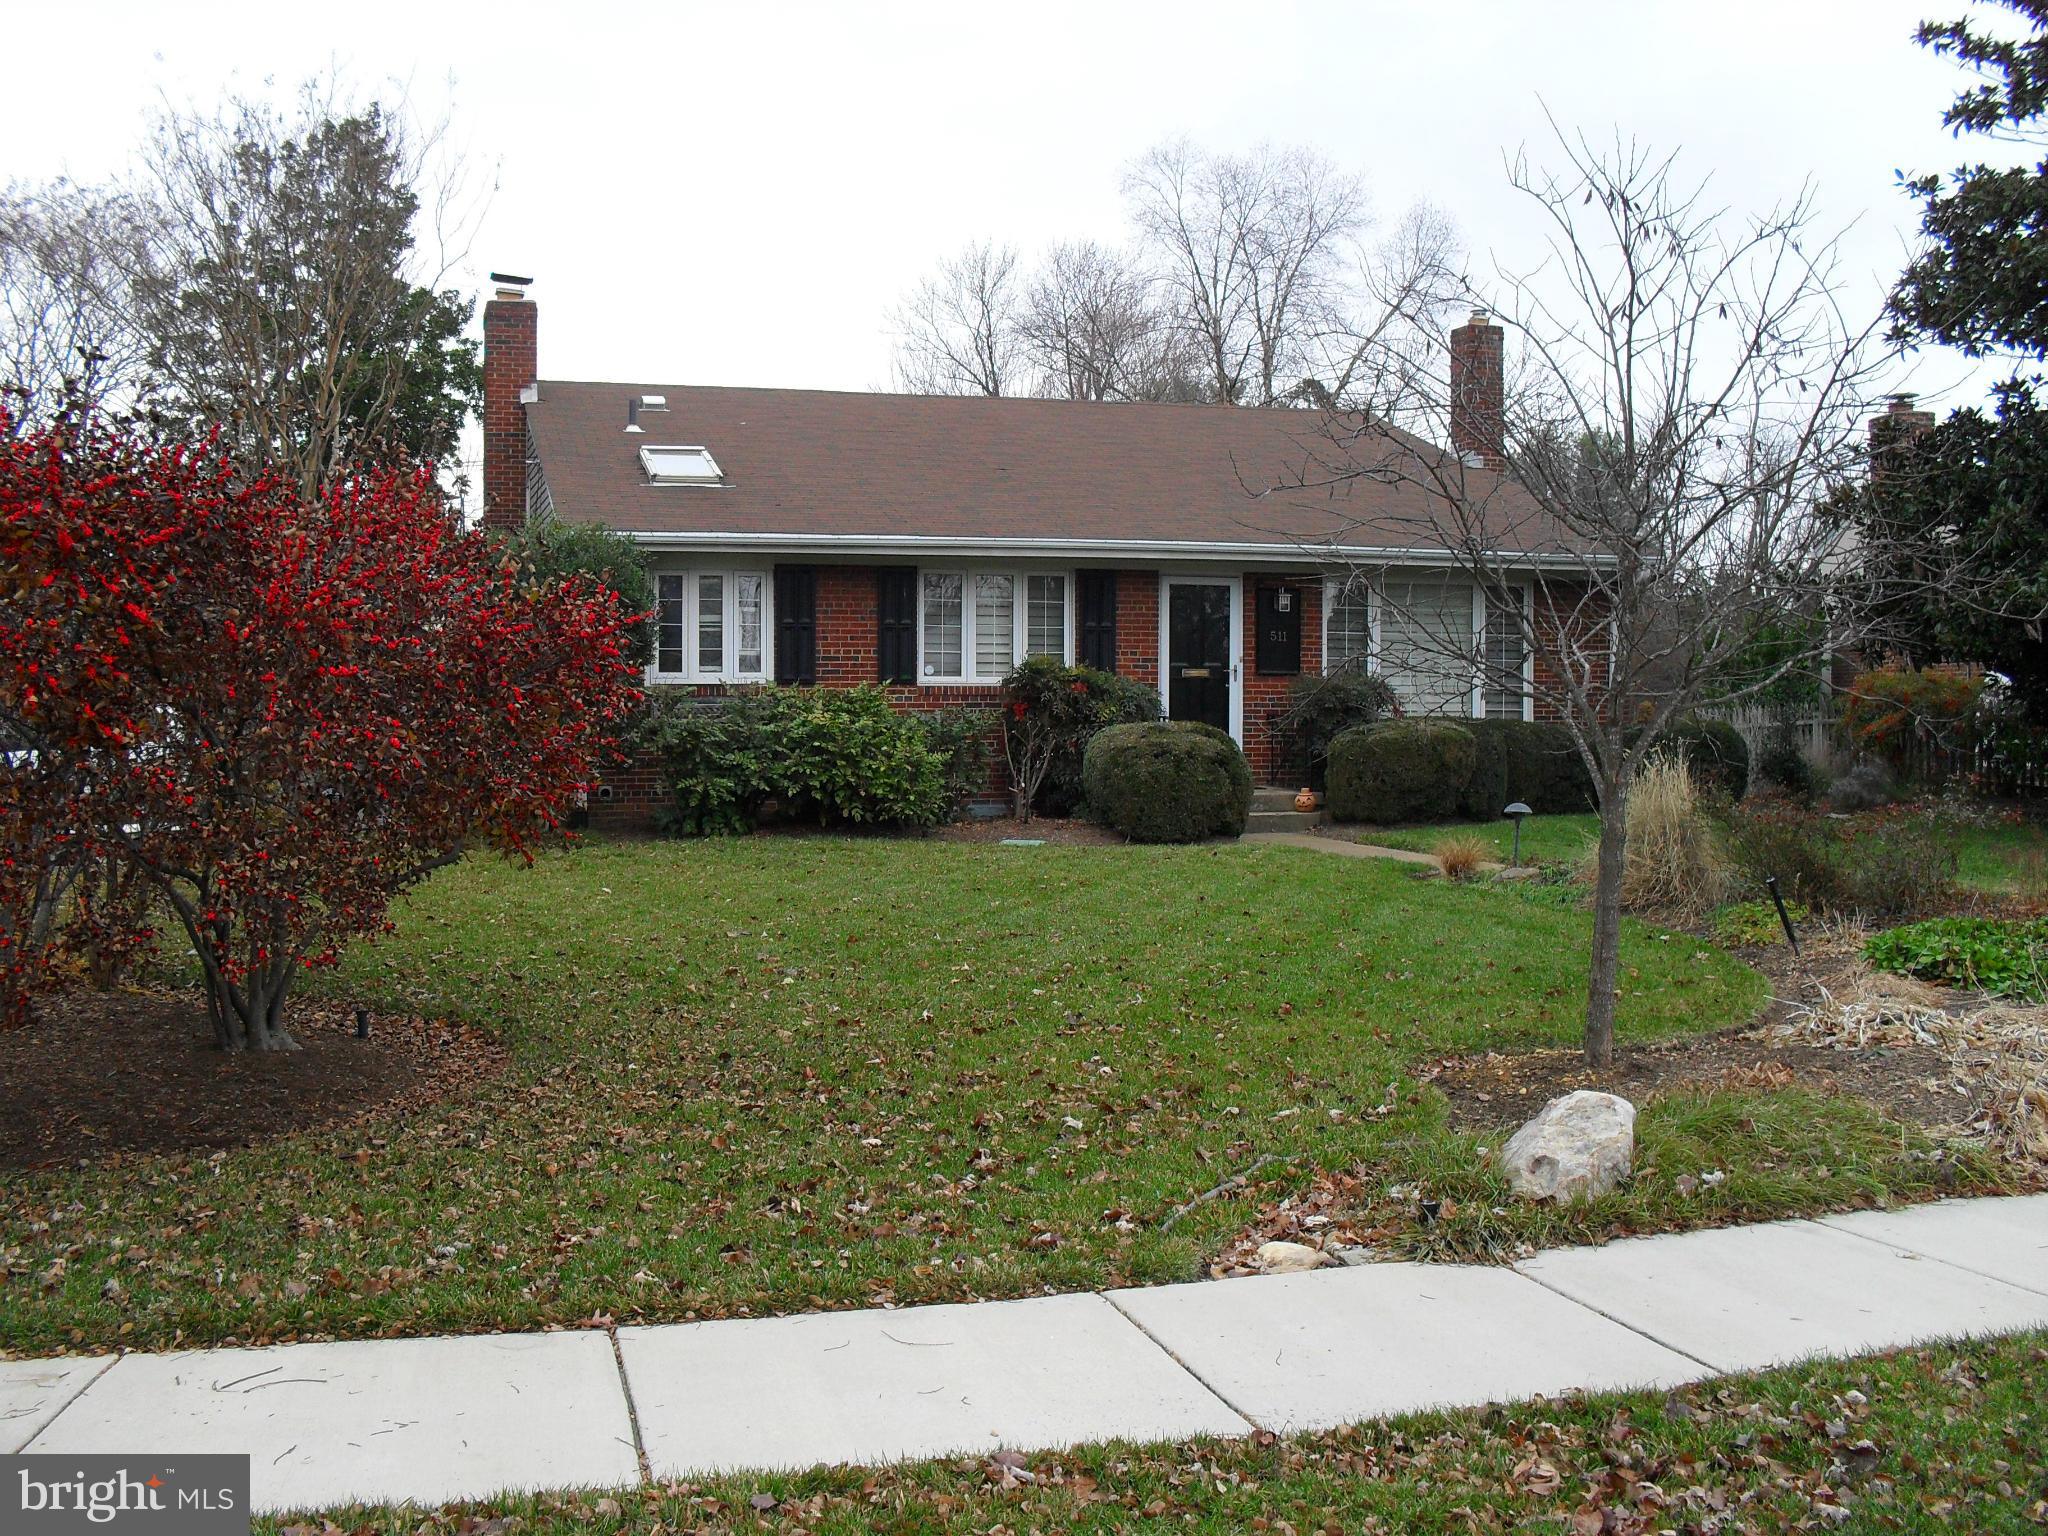 a view of a big yard in front of a brick house with large windows